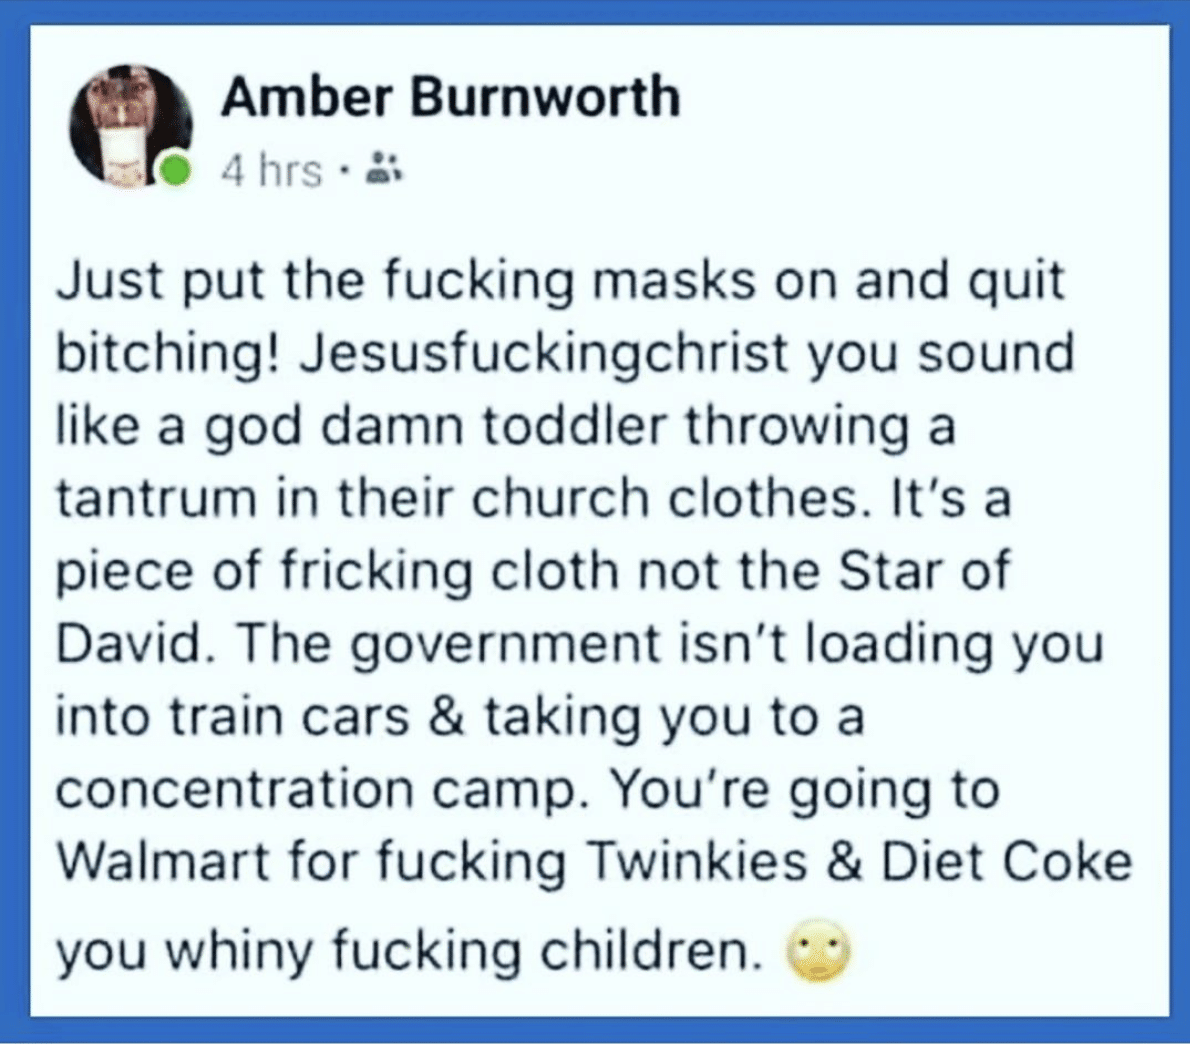 Political, Covid, Nazis, Walmart Political Memes Political, Covid, Nazis, Walmart text: Amber Burnworth 0 4 hrs Just put the fucking masks on and quit bitching! Jesusfuckingchrist you sound like a god damn toddler throwing a tantrum in their church clothes. It's a piece of fricking cloth not the Star of David. The government isn't loading you into train cars & taking you to a concentration camp. You're going to Walmart for fucking Twinkies & Diet Coke you whiny fucking children. 